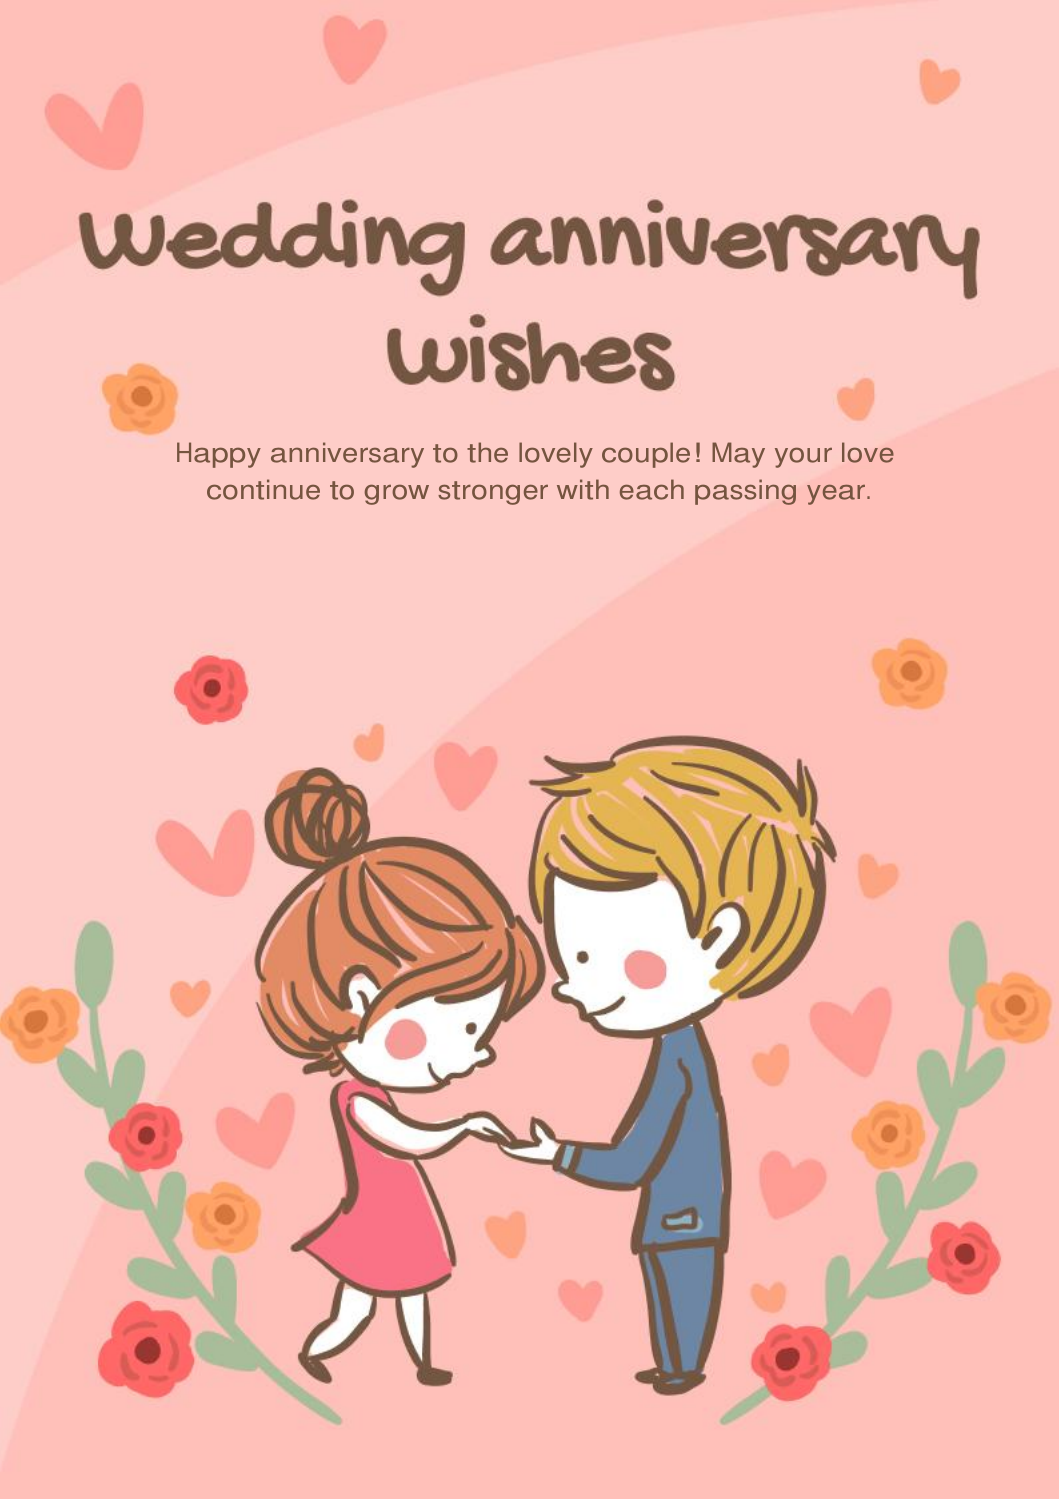 10 Heart-touching Anniversary Wishes for Your Wife